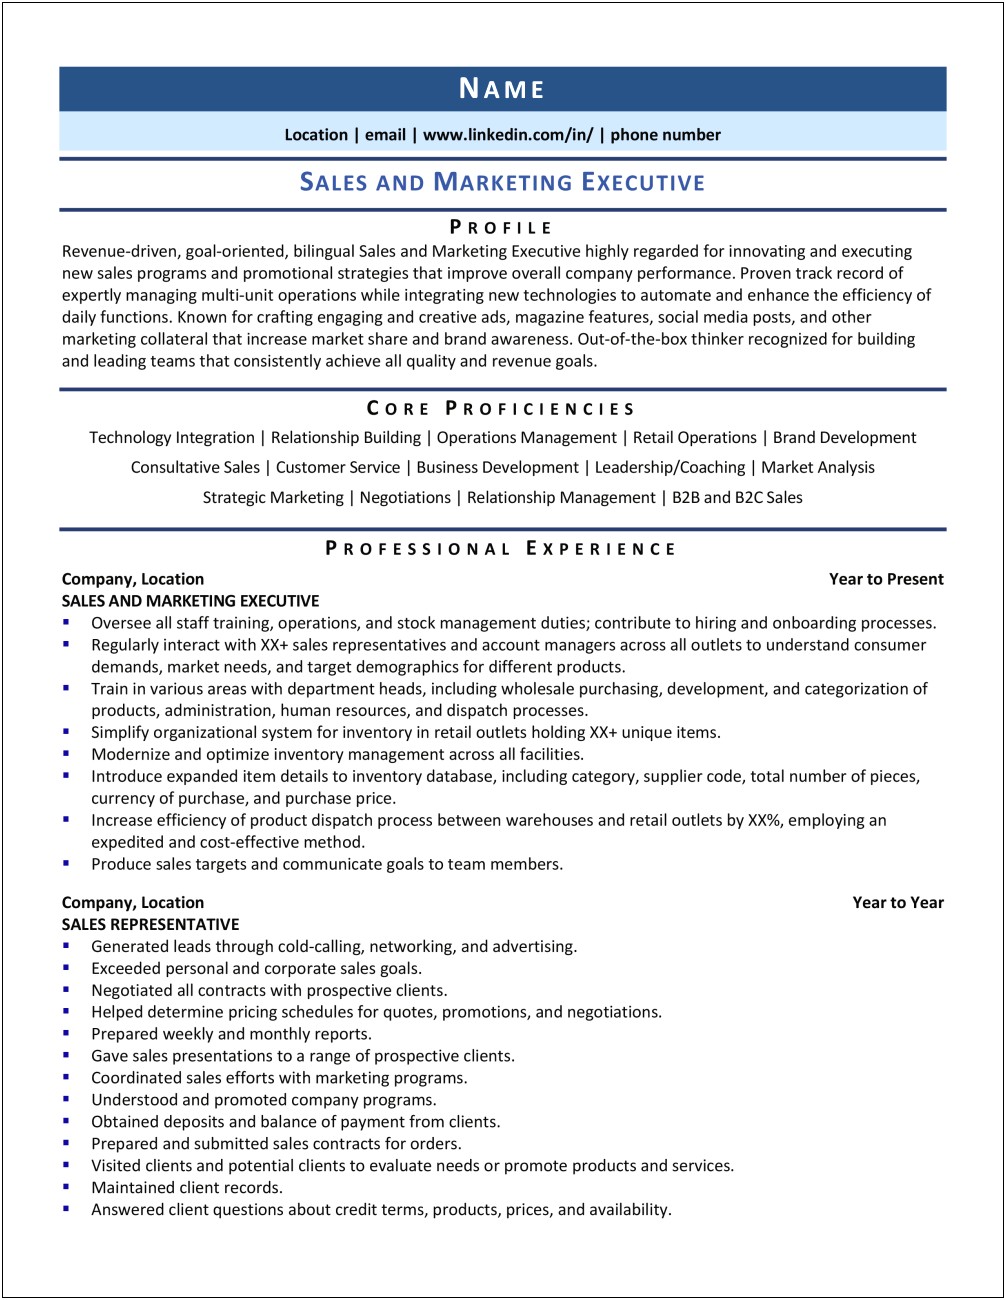 Best Resume For Sales And Marketing